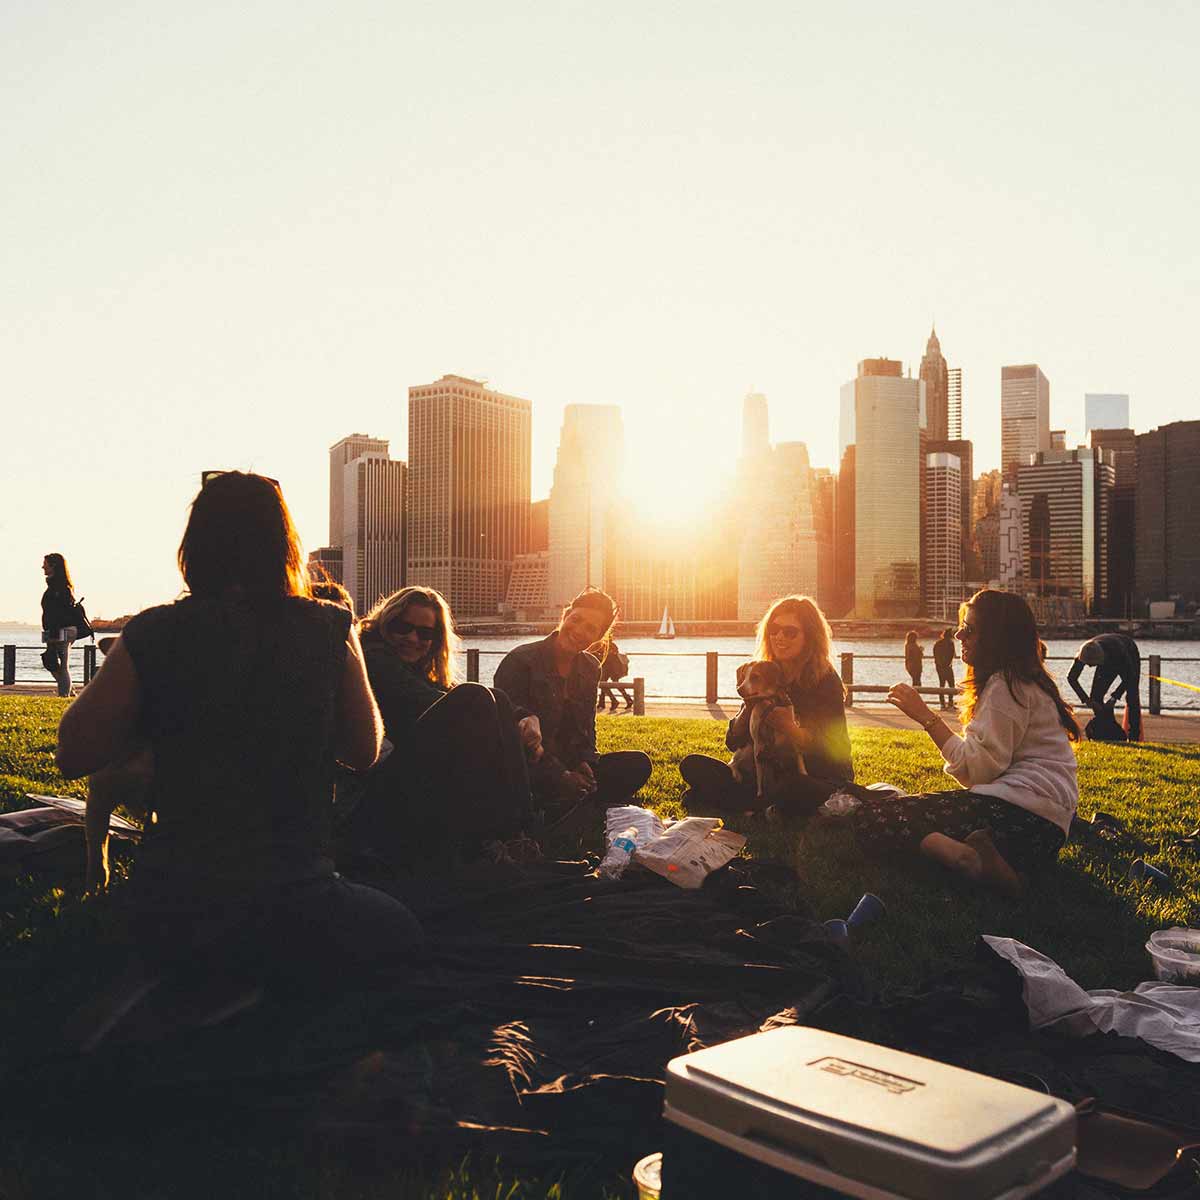 Outdoor Activities With Group Of People Sitting Near Water With Skyline And Sunset In Background